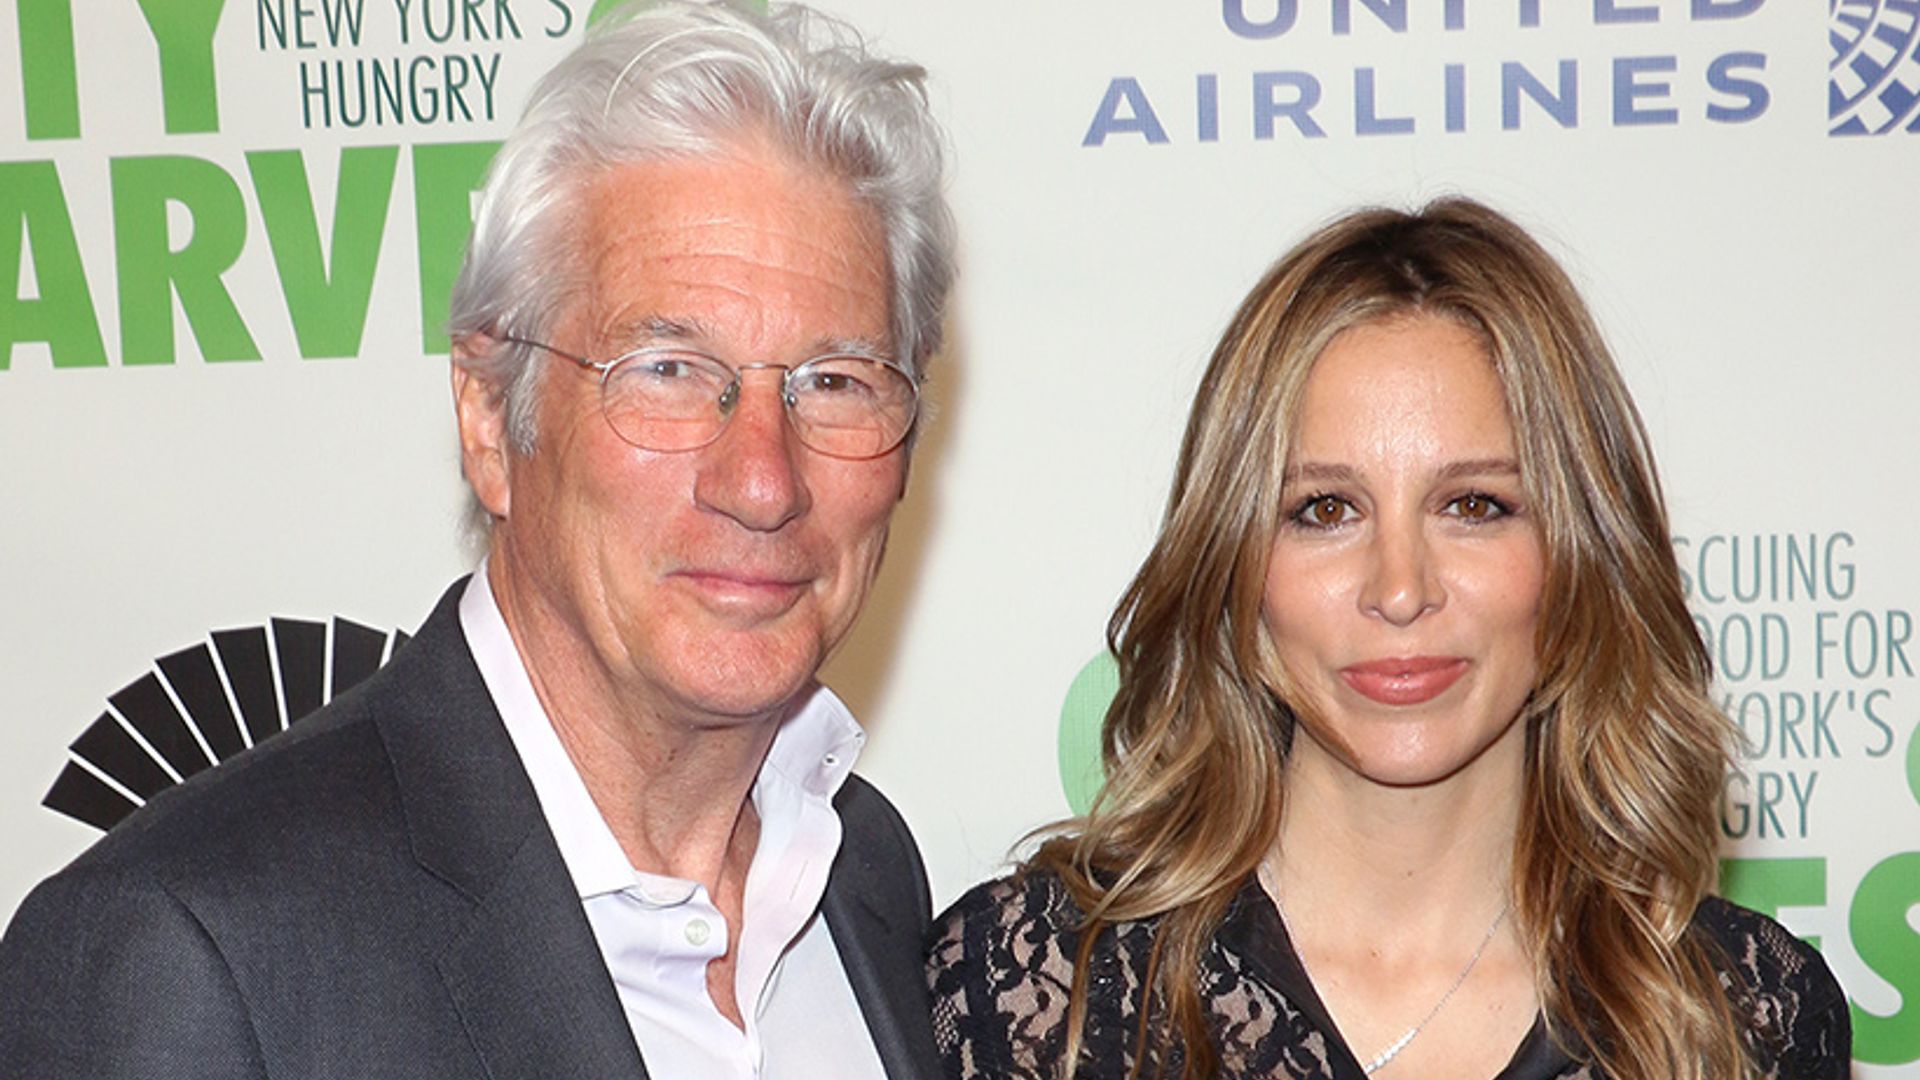 Richard Gere: Latest News, Pictures & Videos - HELLO!